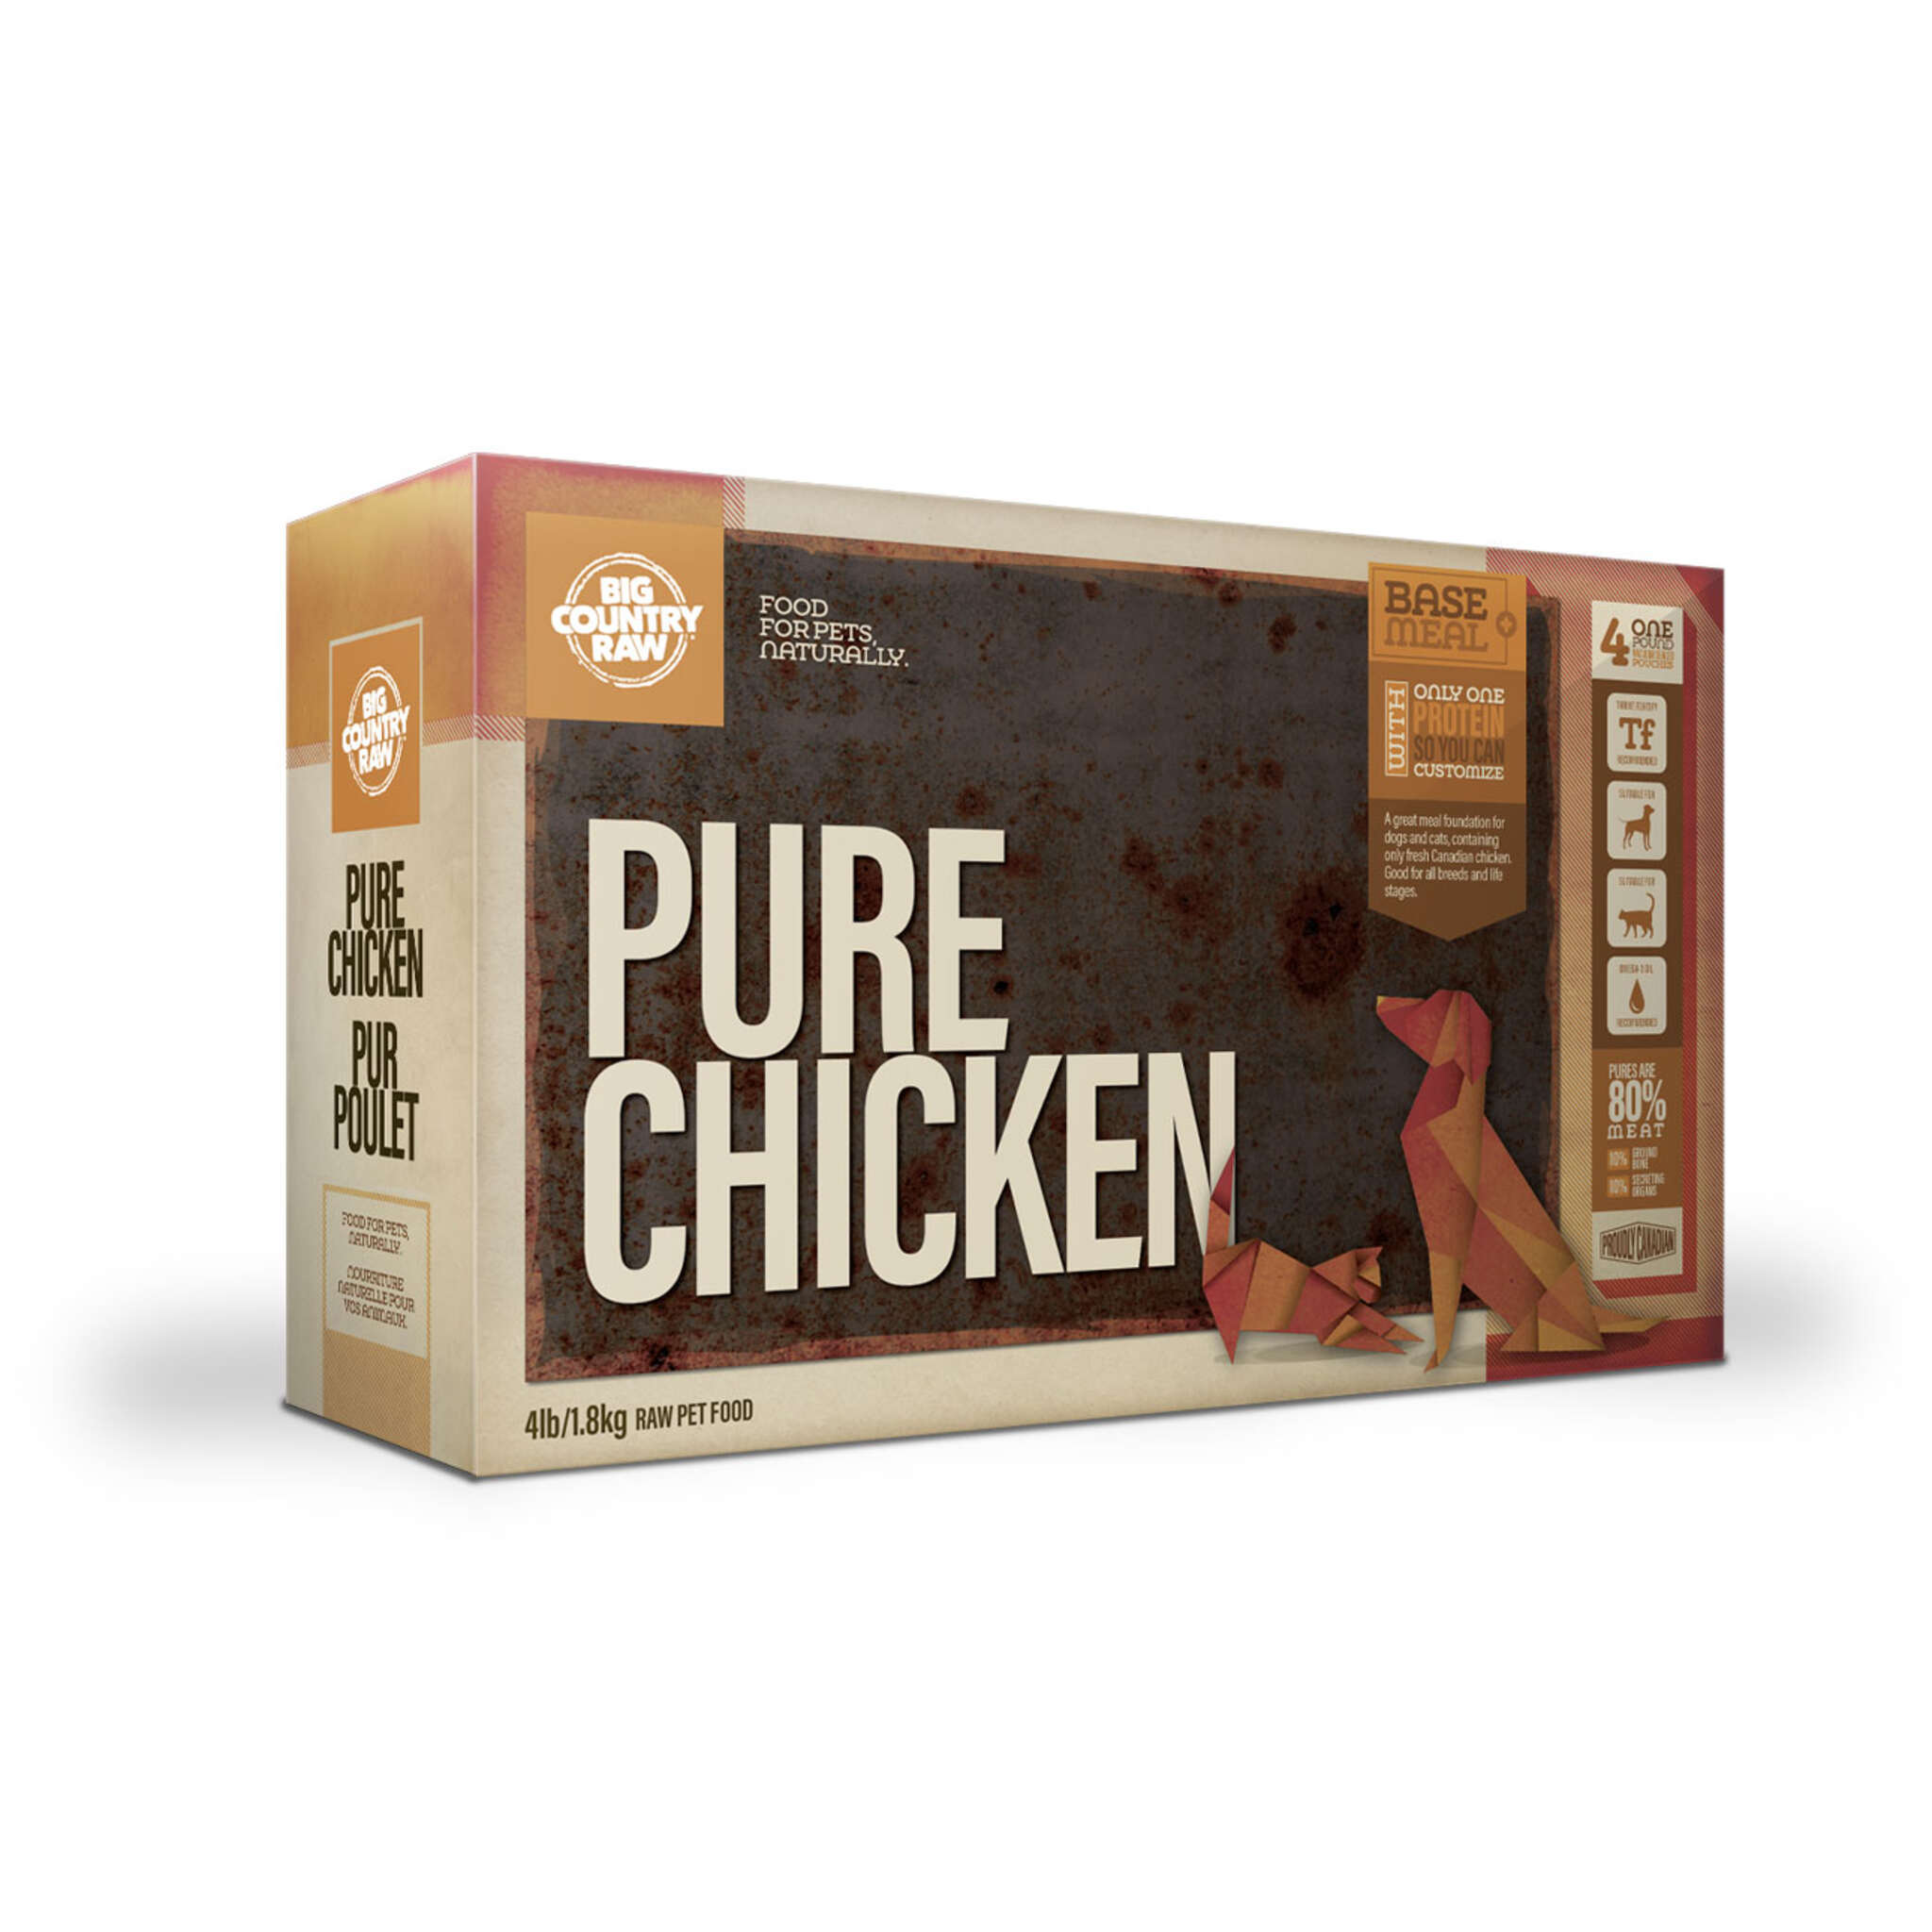 A carton of Big Country Raw dog food, Pure Chicken recipe, 4 lb (contains four 1 lb patties), requires supplementation and freezing.